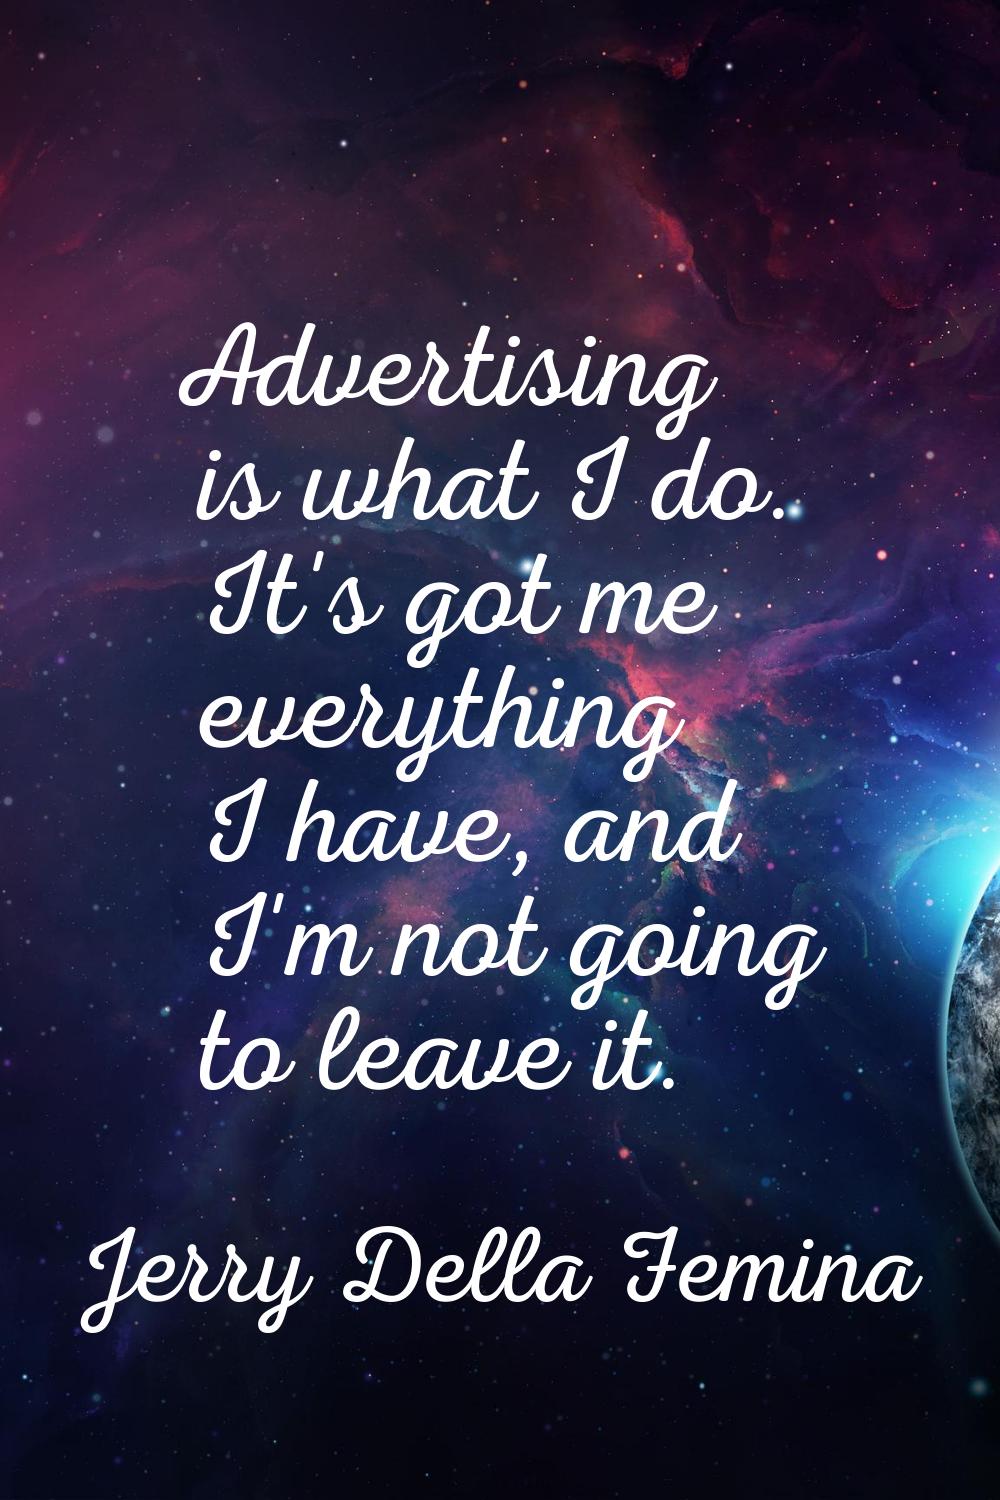 Advertising is what I do. It's got me everything I have, and I'm not going to leave it.